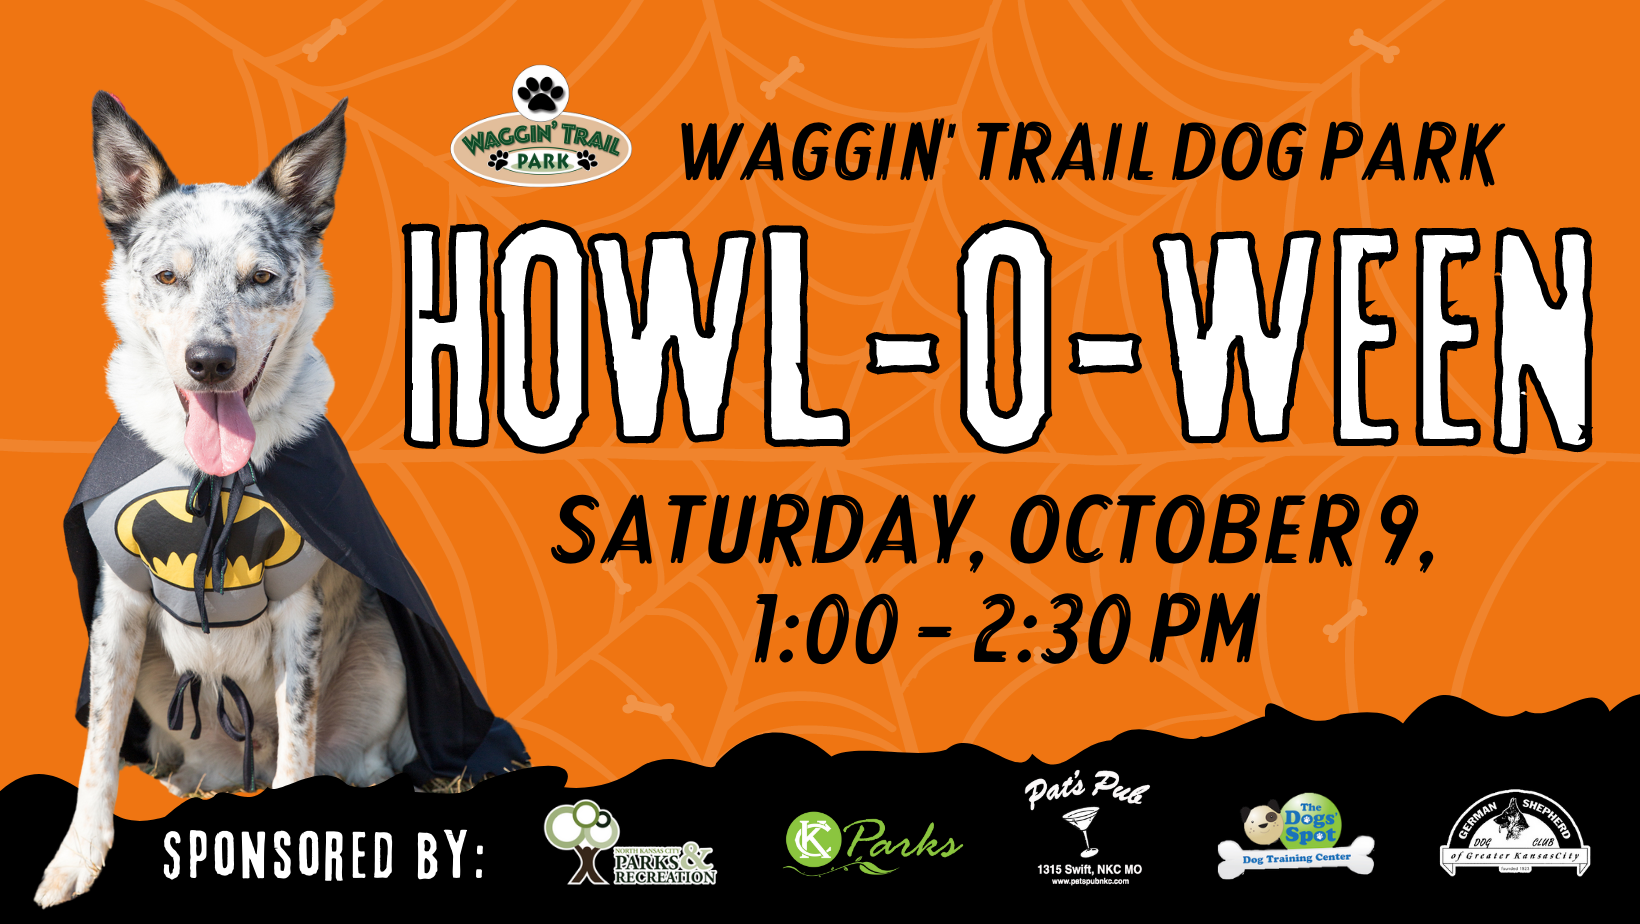 Howl-o-ween at waggin trail dog park